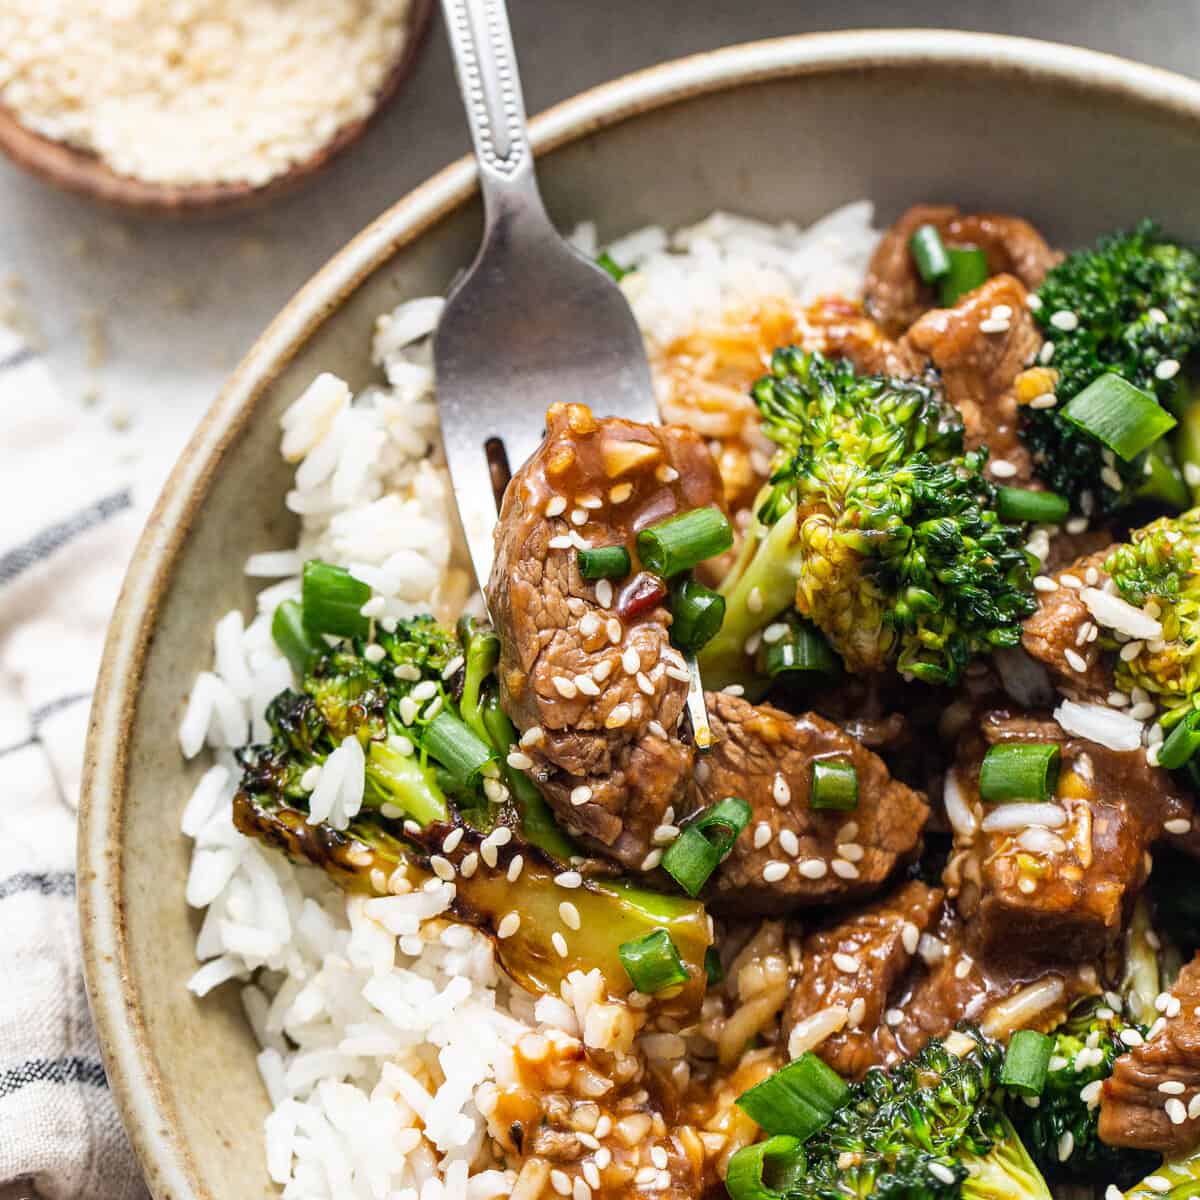 Homemade Beef and Broccoli - Fit Foodie Finds